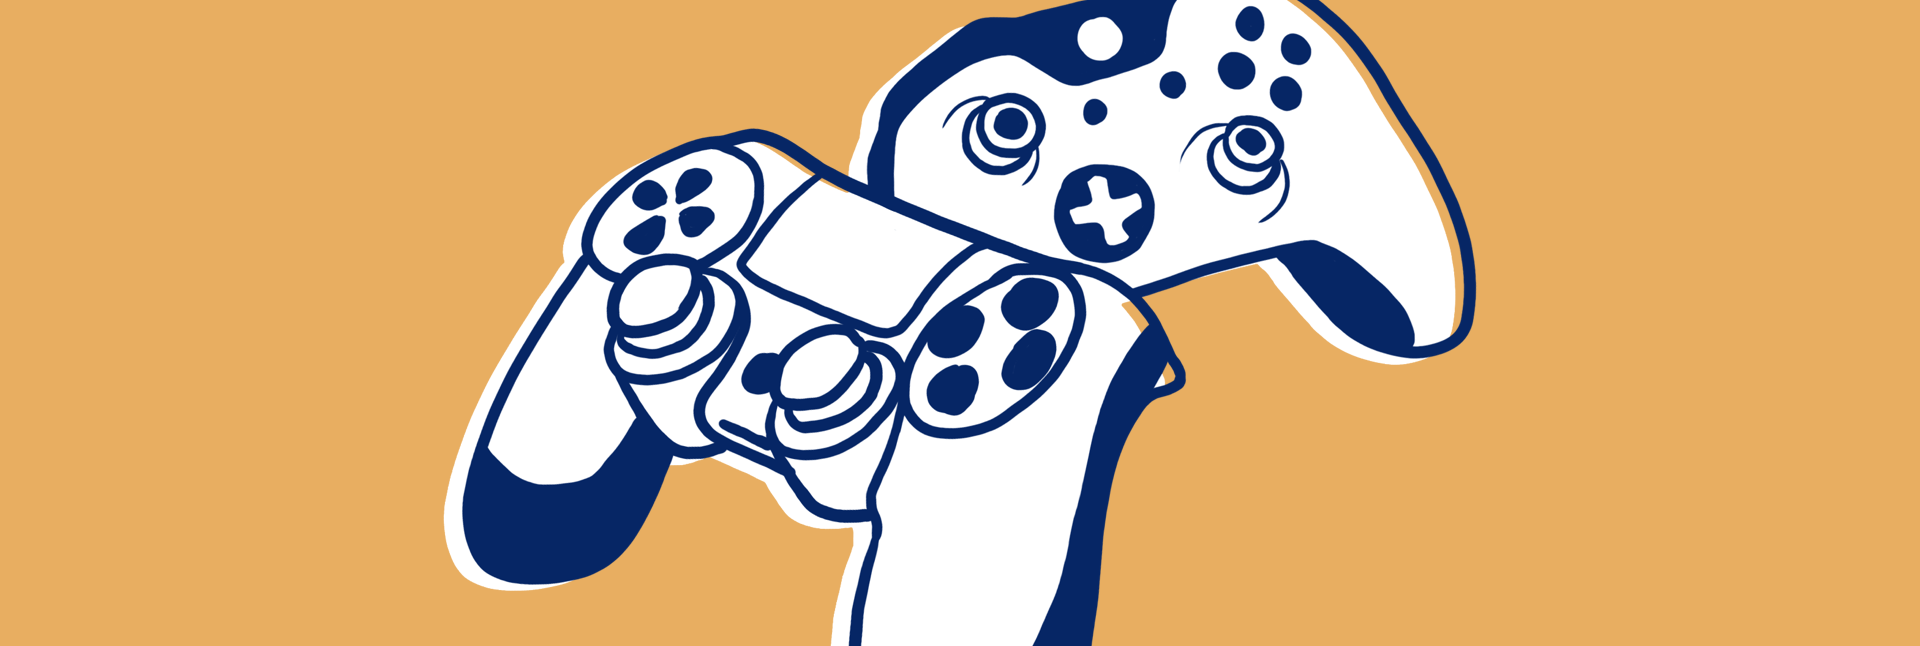 setup ps4 controller for steam mac